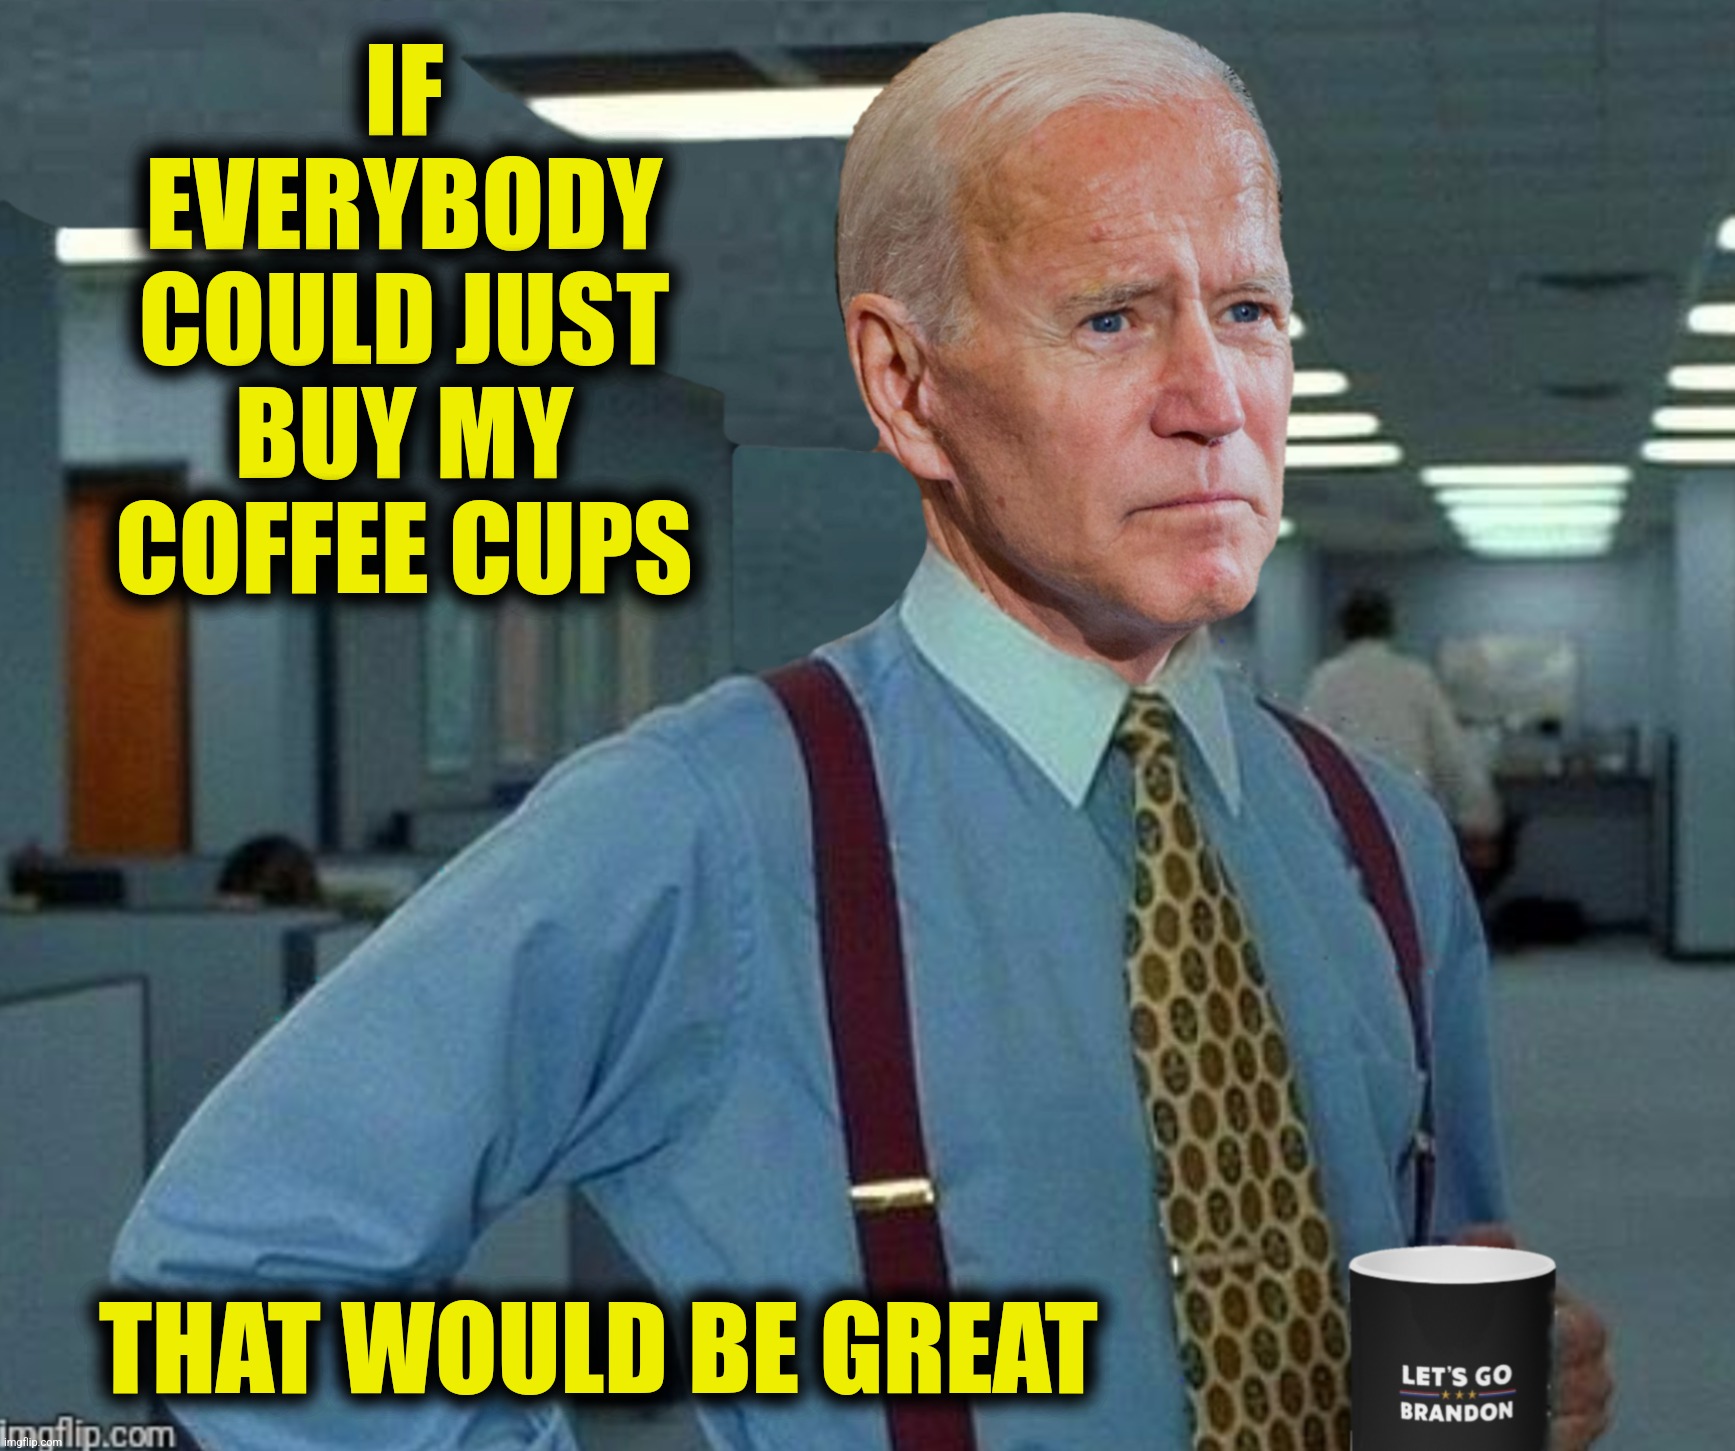 IF EVERYBODY COULD JUST BUY MY COFFEE CUPS THAT WOULD BE GREAT | made w/ Imgflip meme maker